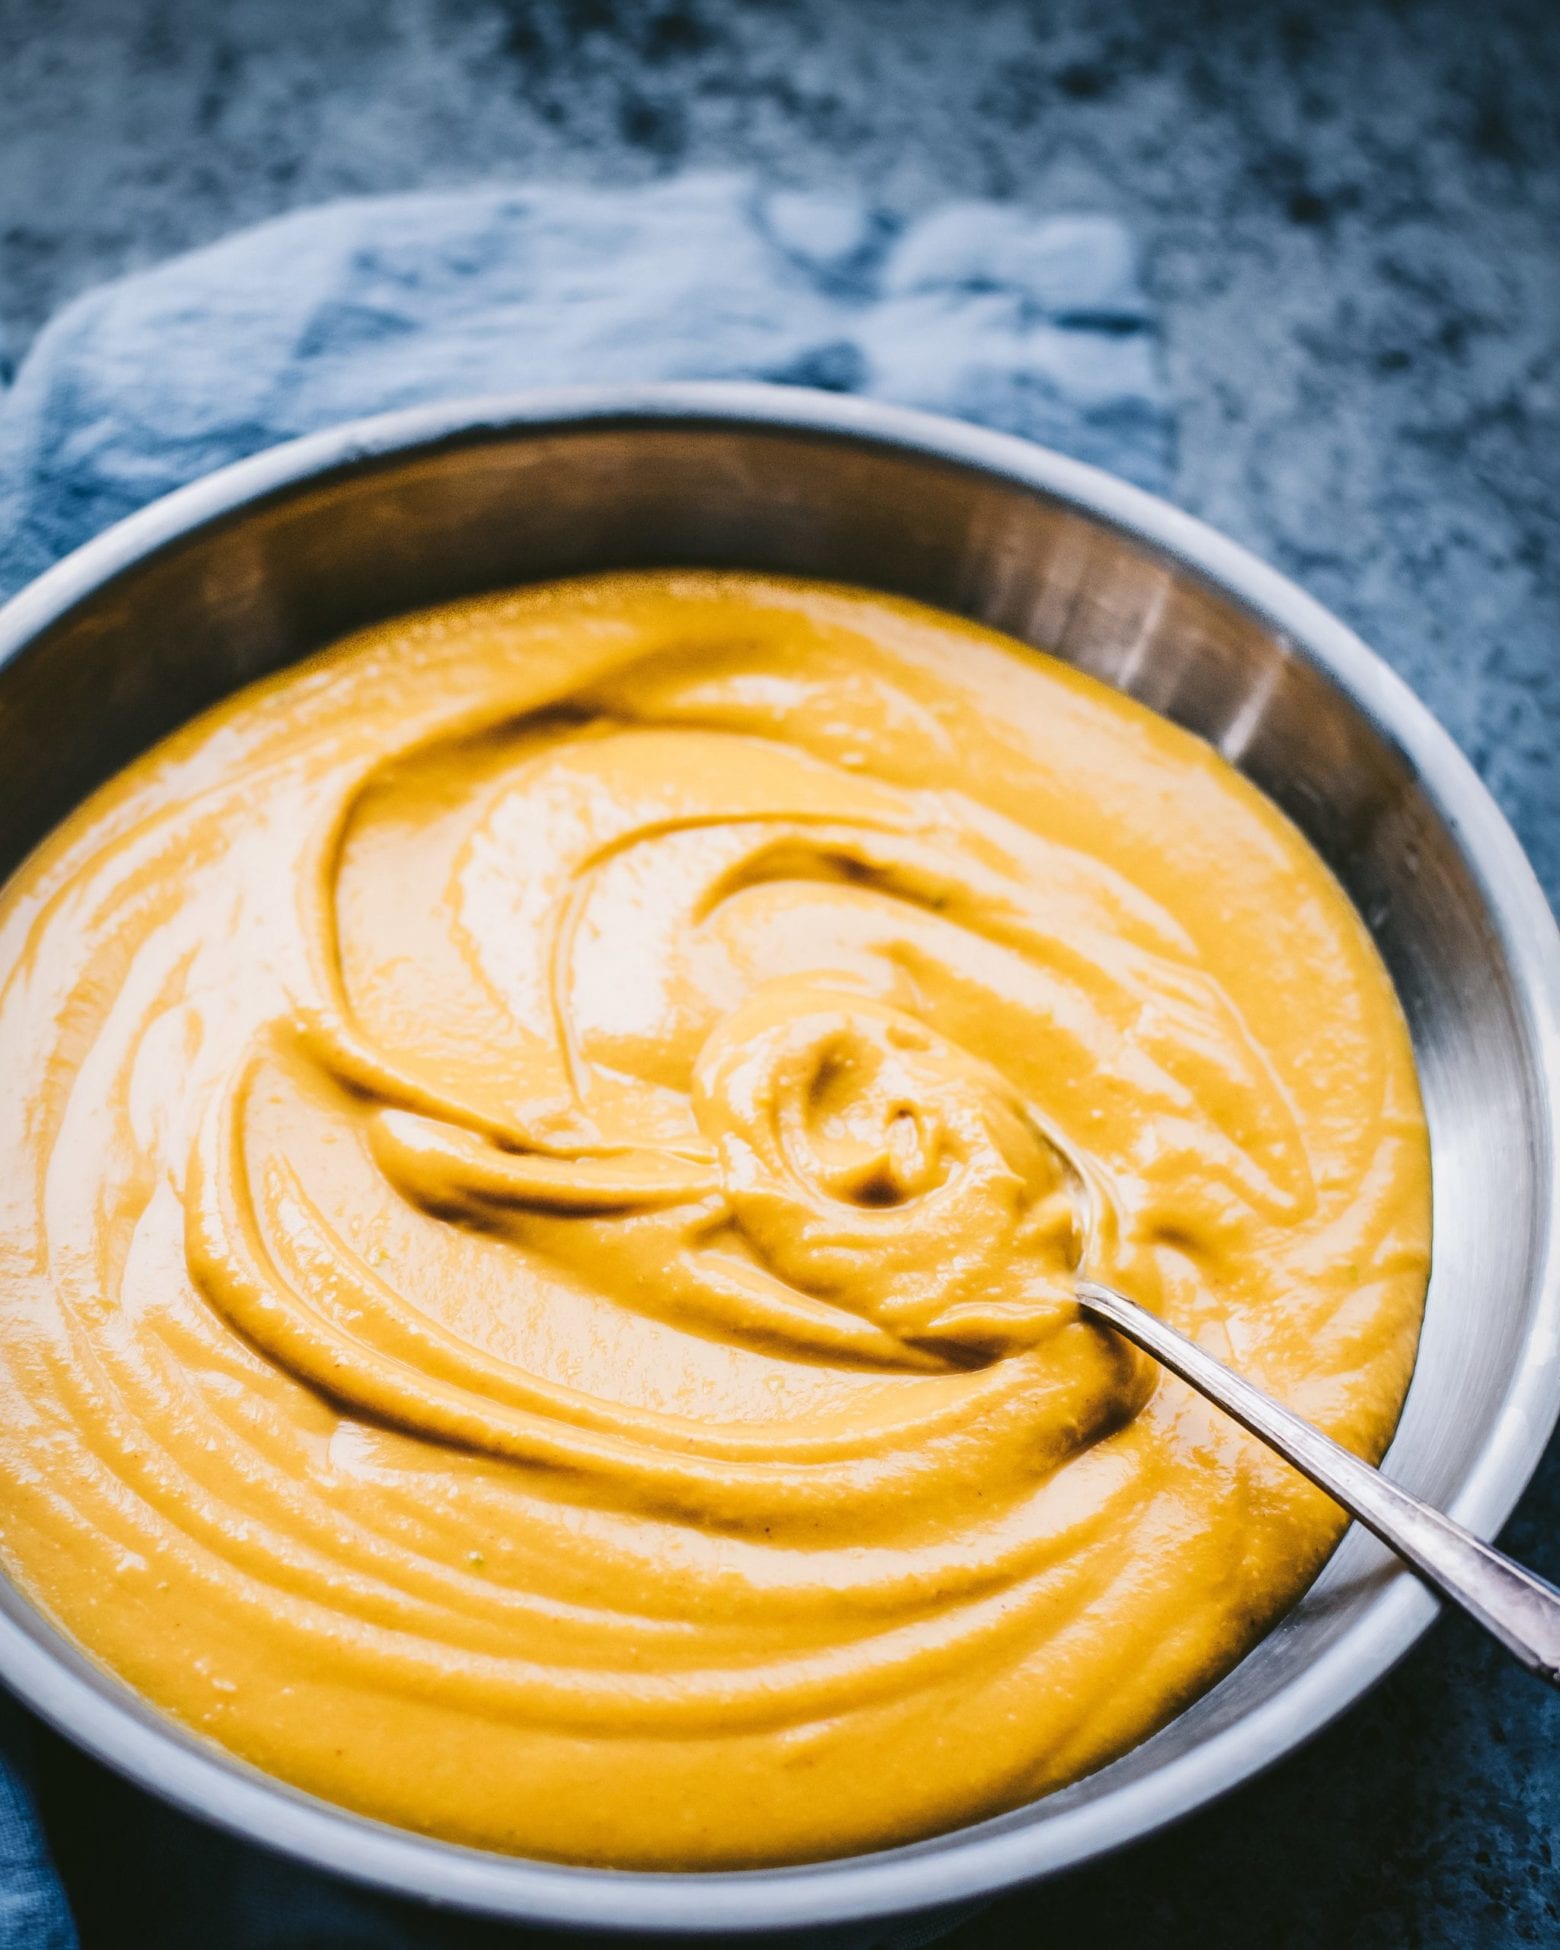 Nut-Free Vegan Cheese Sauce (Oil-Free and Soy-Free)